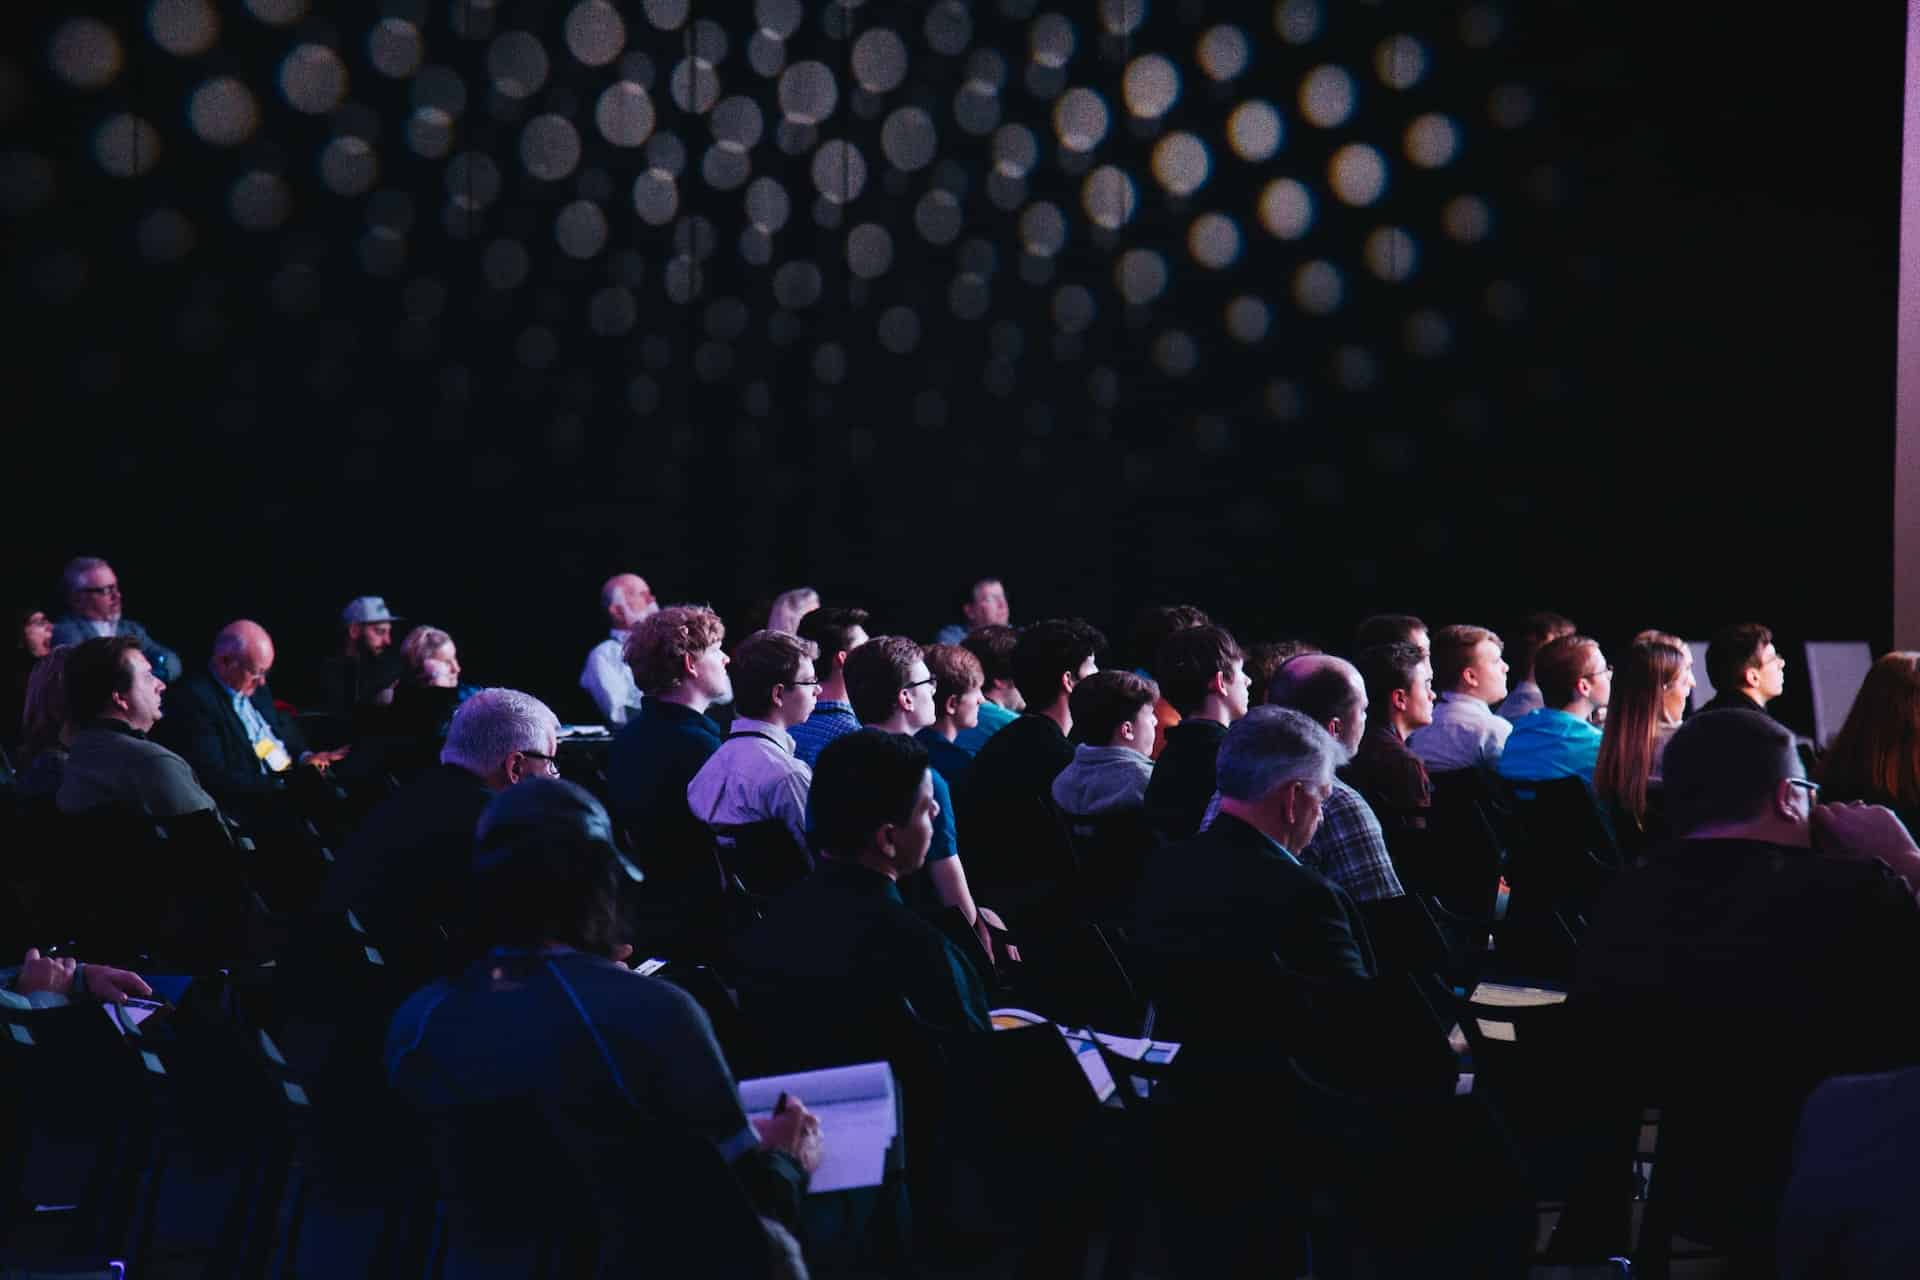 Image Title: Austin Event Trends Conference Audience Image Description: Attendees focused on a presentation at an Austin event trends conference Alt Text: Attentive Audience Source: https://unsplash.com/photos/crowd-of-people-sitting-on-chairs-inside-room-F2KRf_QfCqw